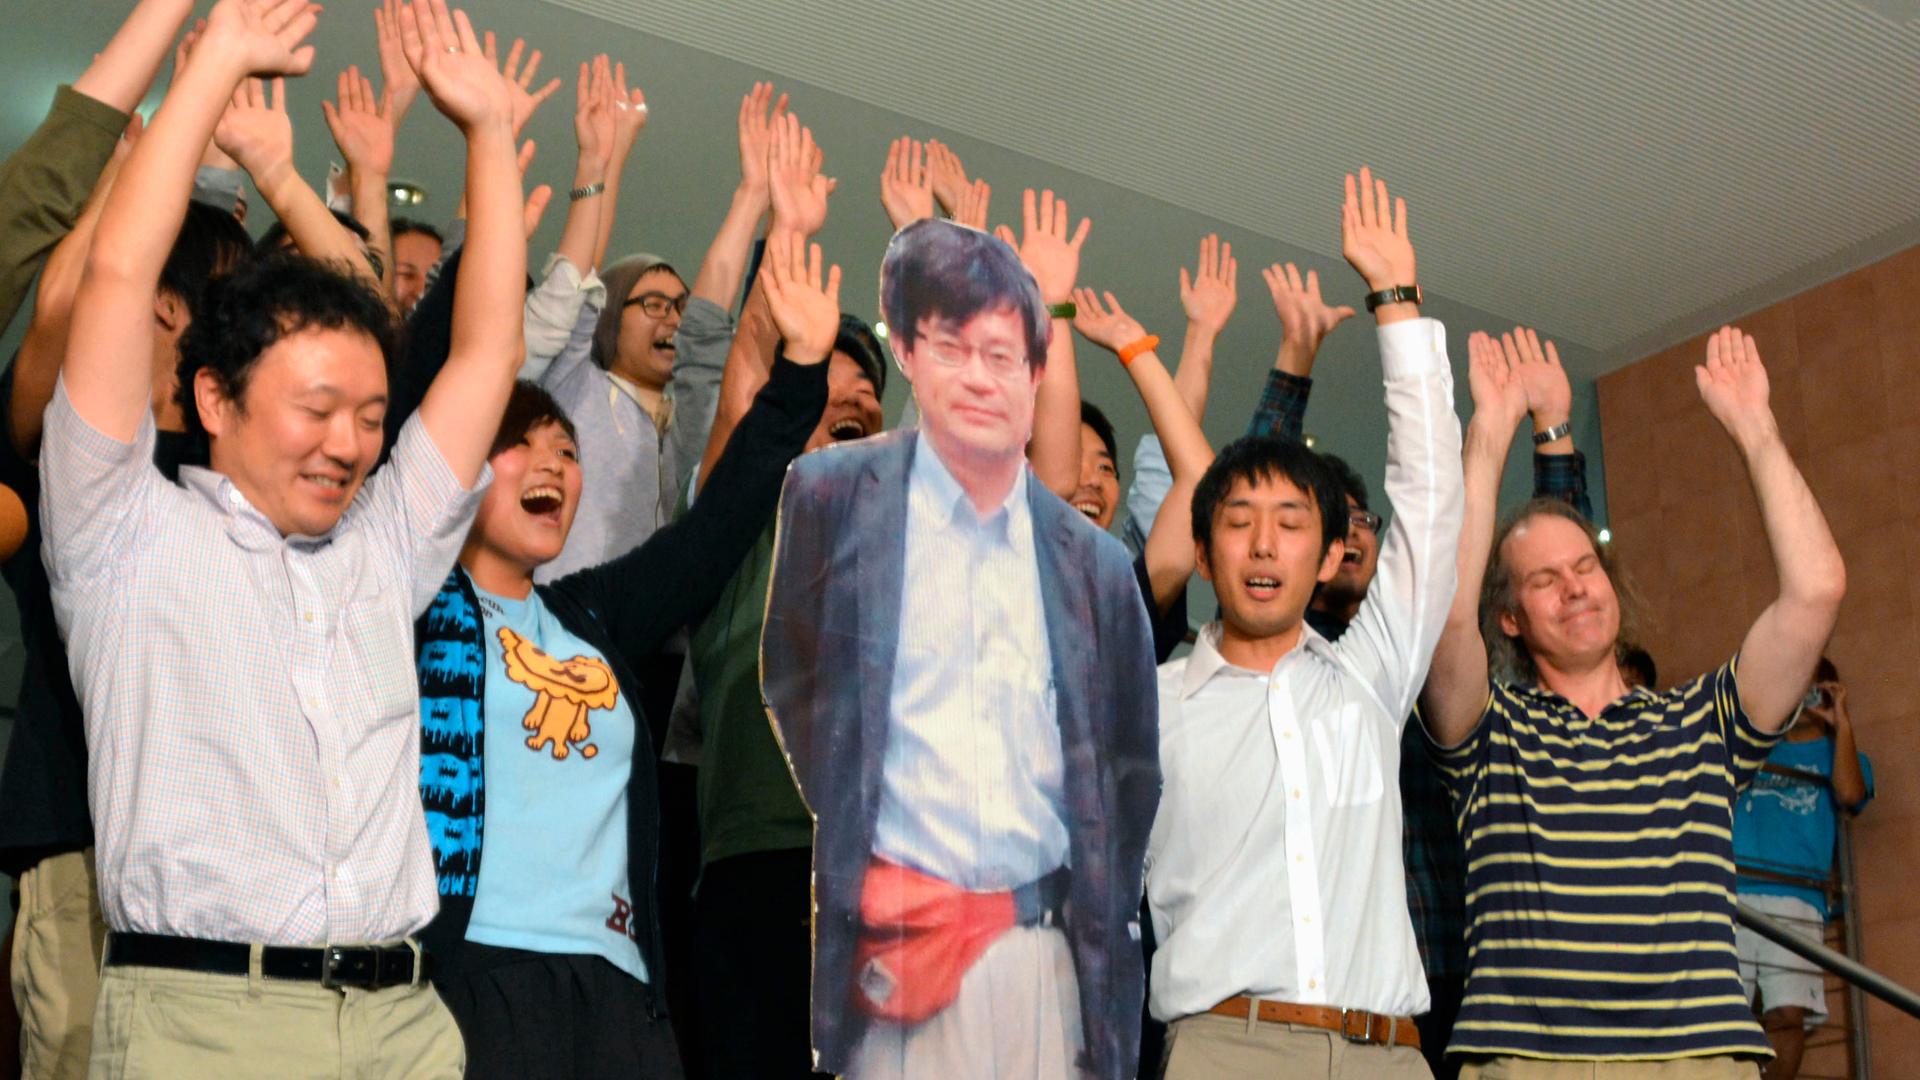 A life-size cardboard cutout photo of Japanese scientist Hiroshi Amano, a professor at Nagoya University, is surrounded by his laboratory staff members as they raise hands and shout "Banzai", or "Cheers."